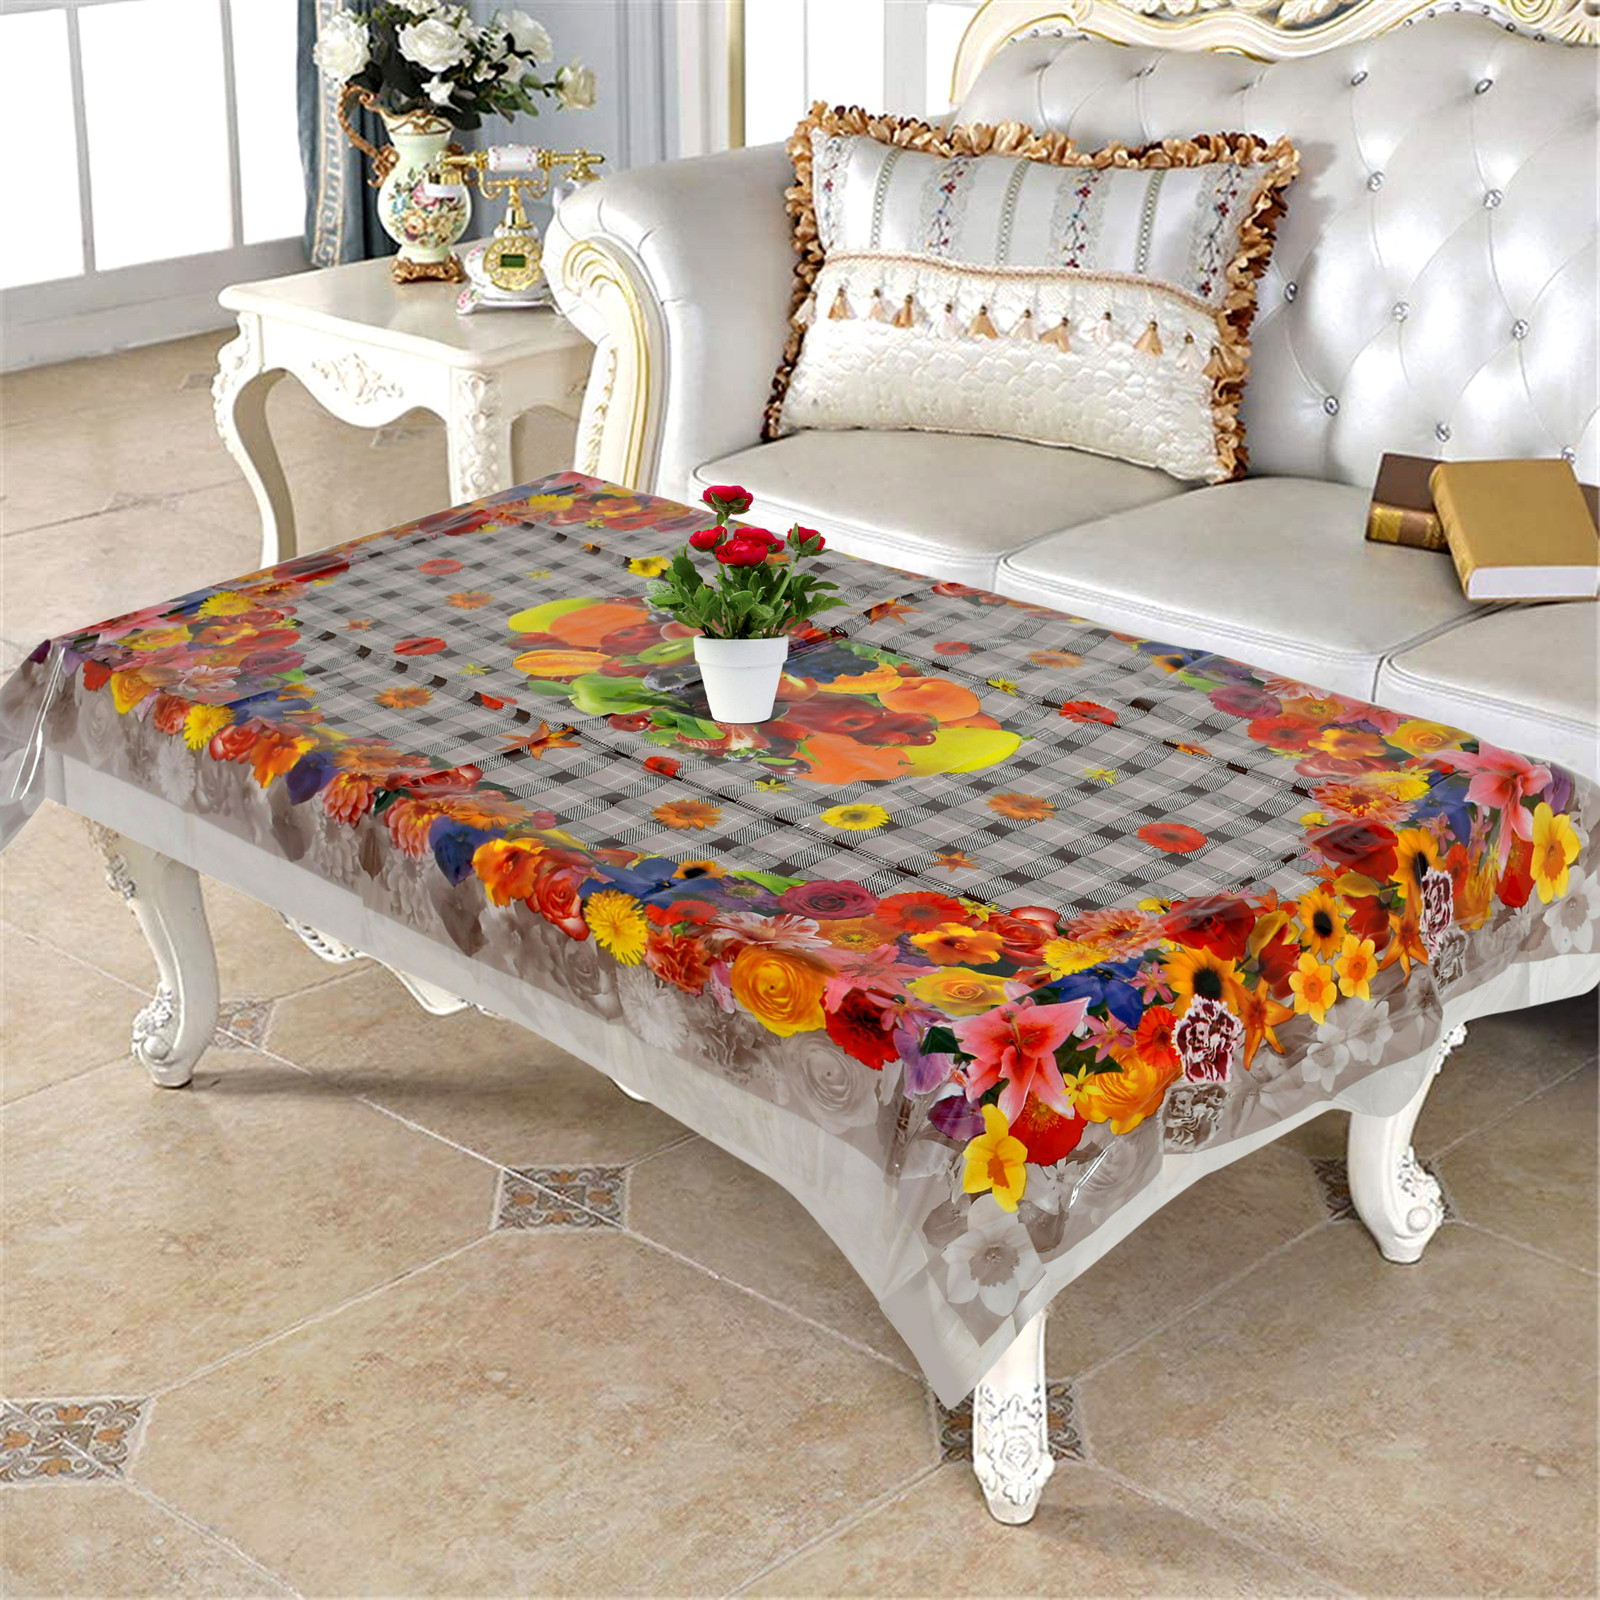 Kuber Industries Flower Printed PVC 4 Seater Center Table Cover 40